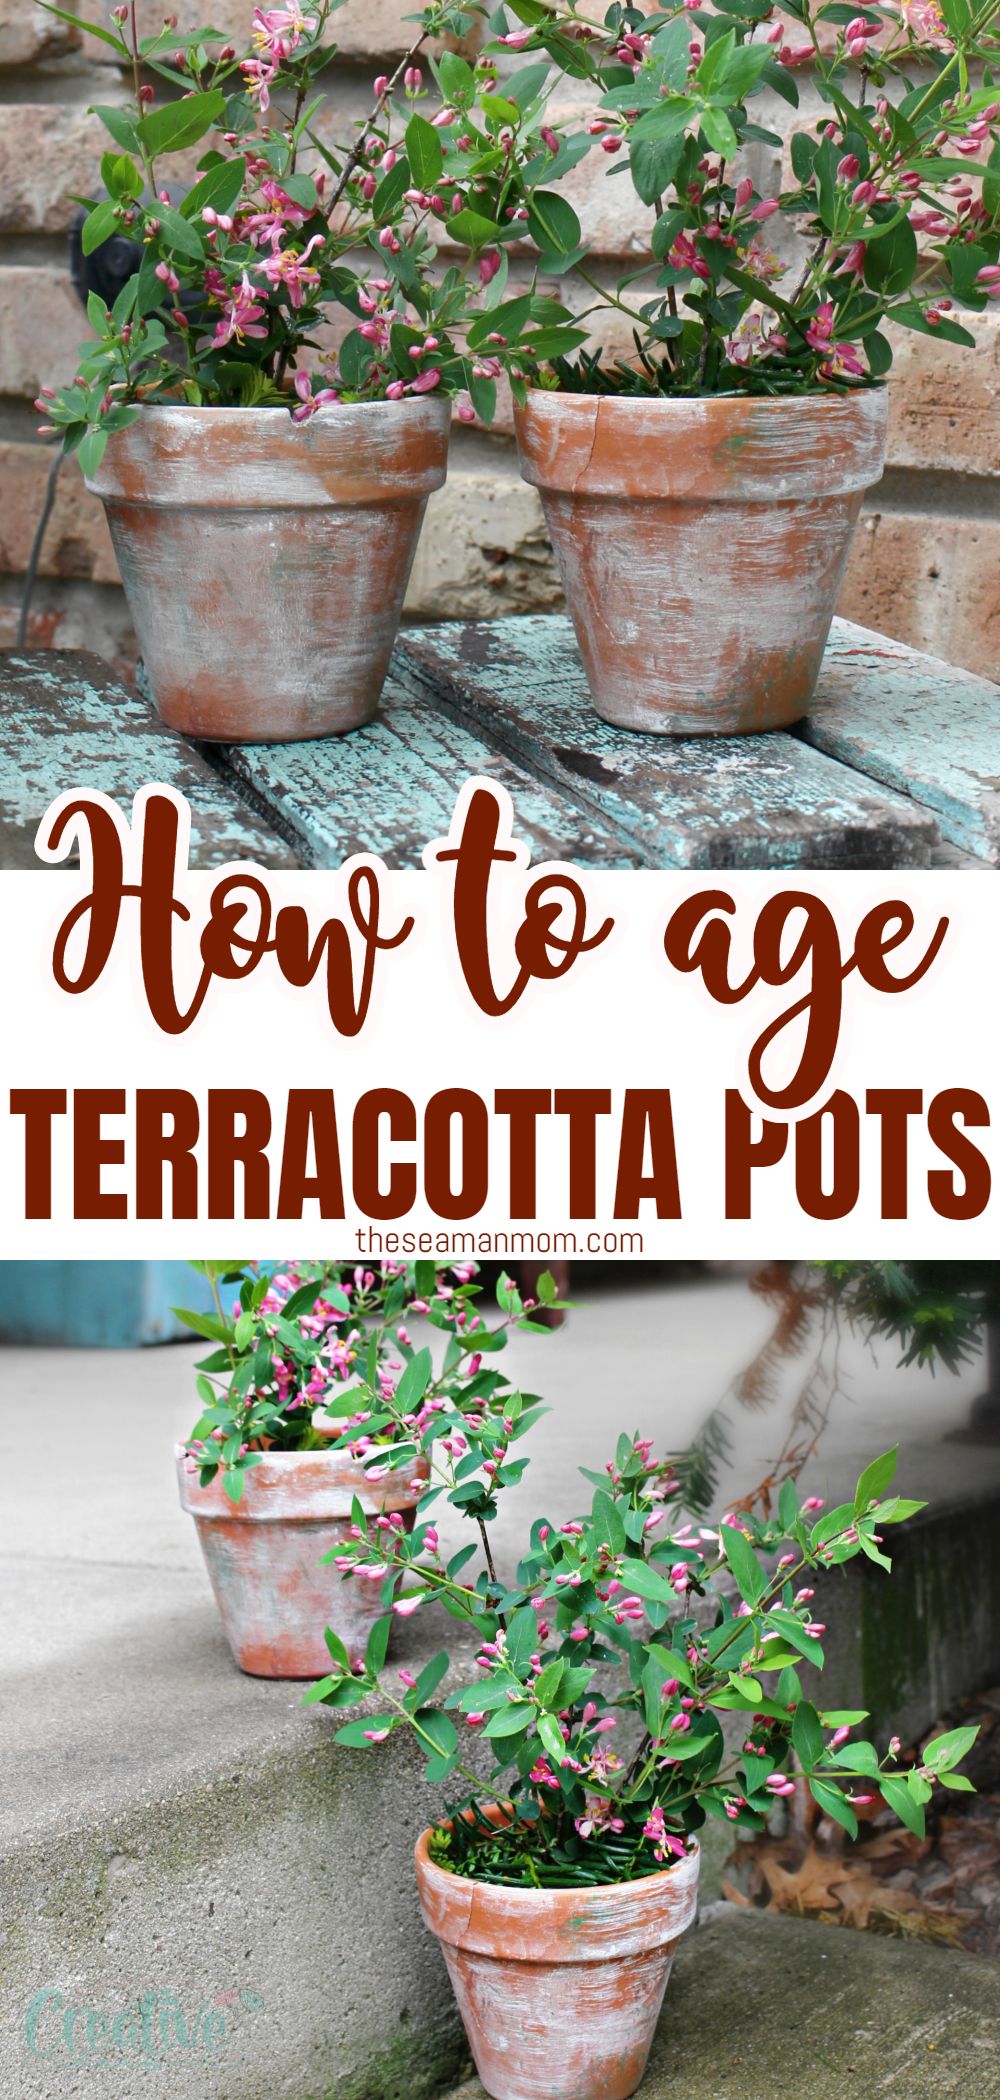 Bring a little vintage to your home decor with a couple of distressed, white washed terracotta pots. These aged terracotta pots are so insanely easy to make you'll find yourself whipping up a bunch of these in just a matter of minutes! In this tutorial you'll learn how to make terracotta pots look old in just a few easy, simple steps! via @petroneagu